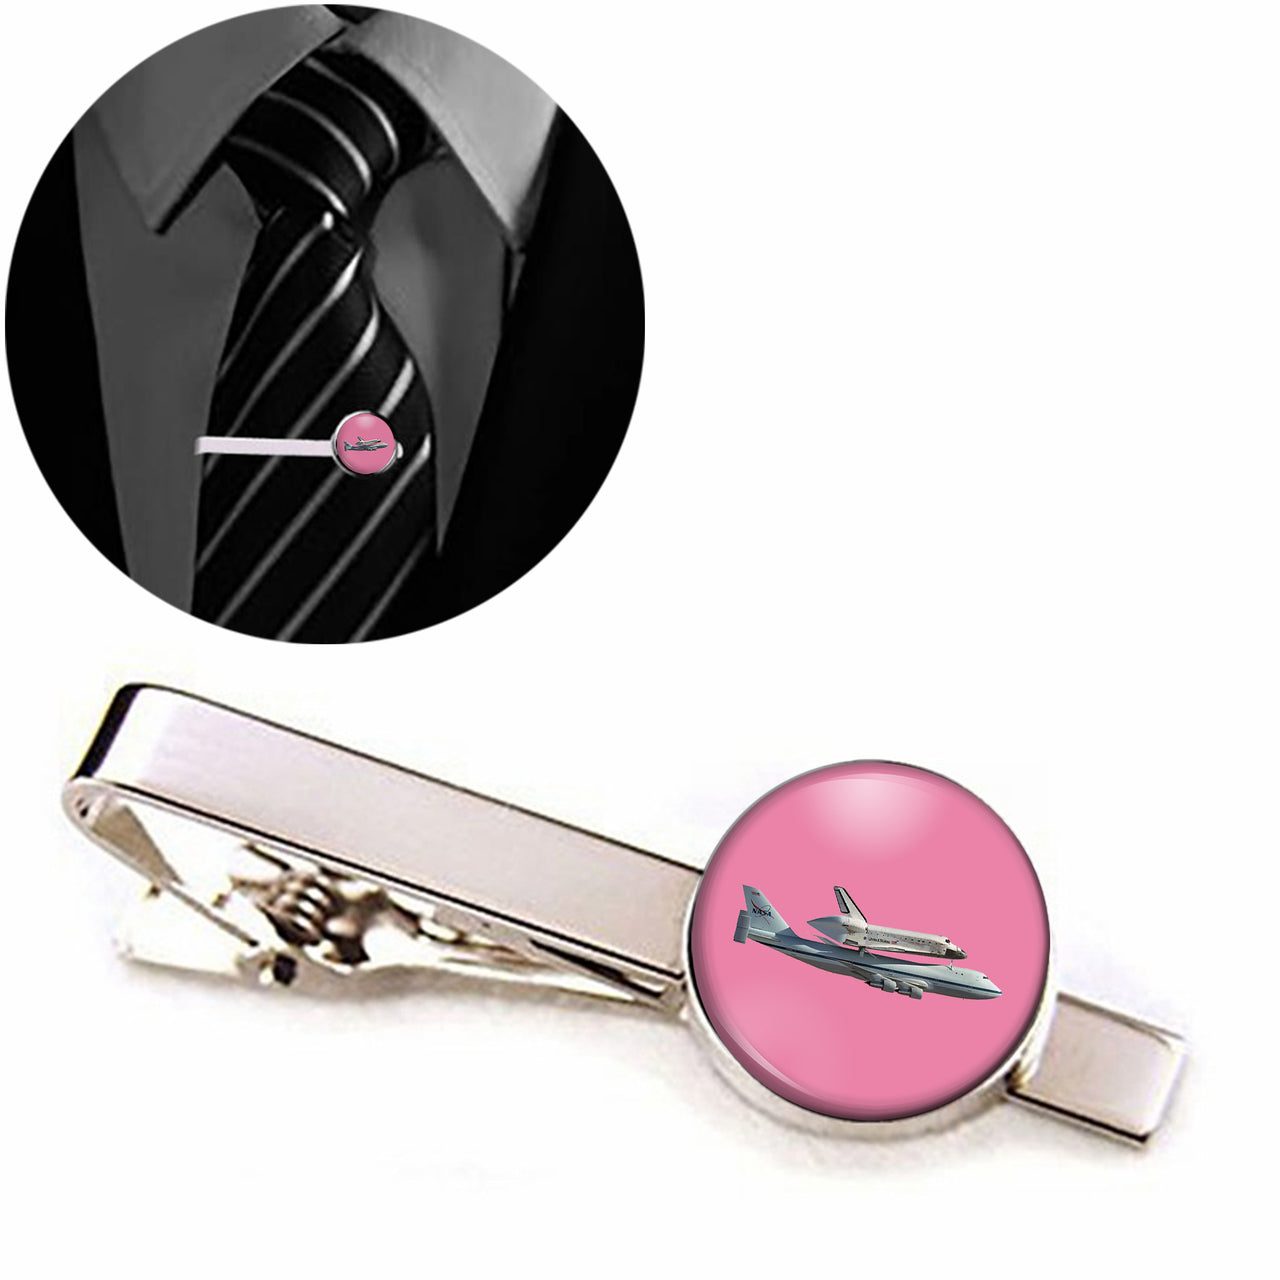 Space shuttle on 747 Designed Tie Clips